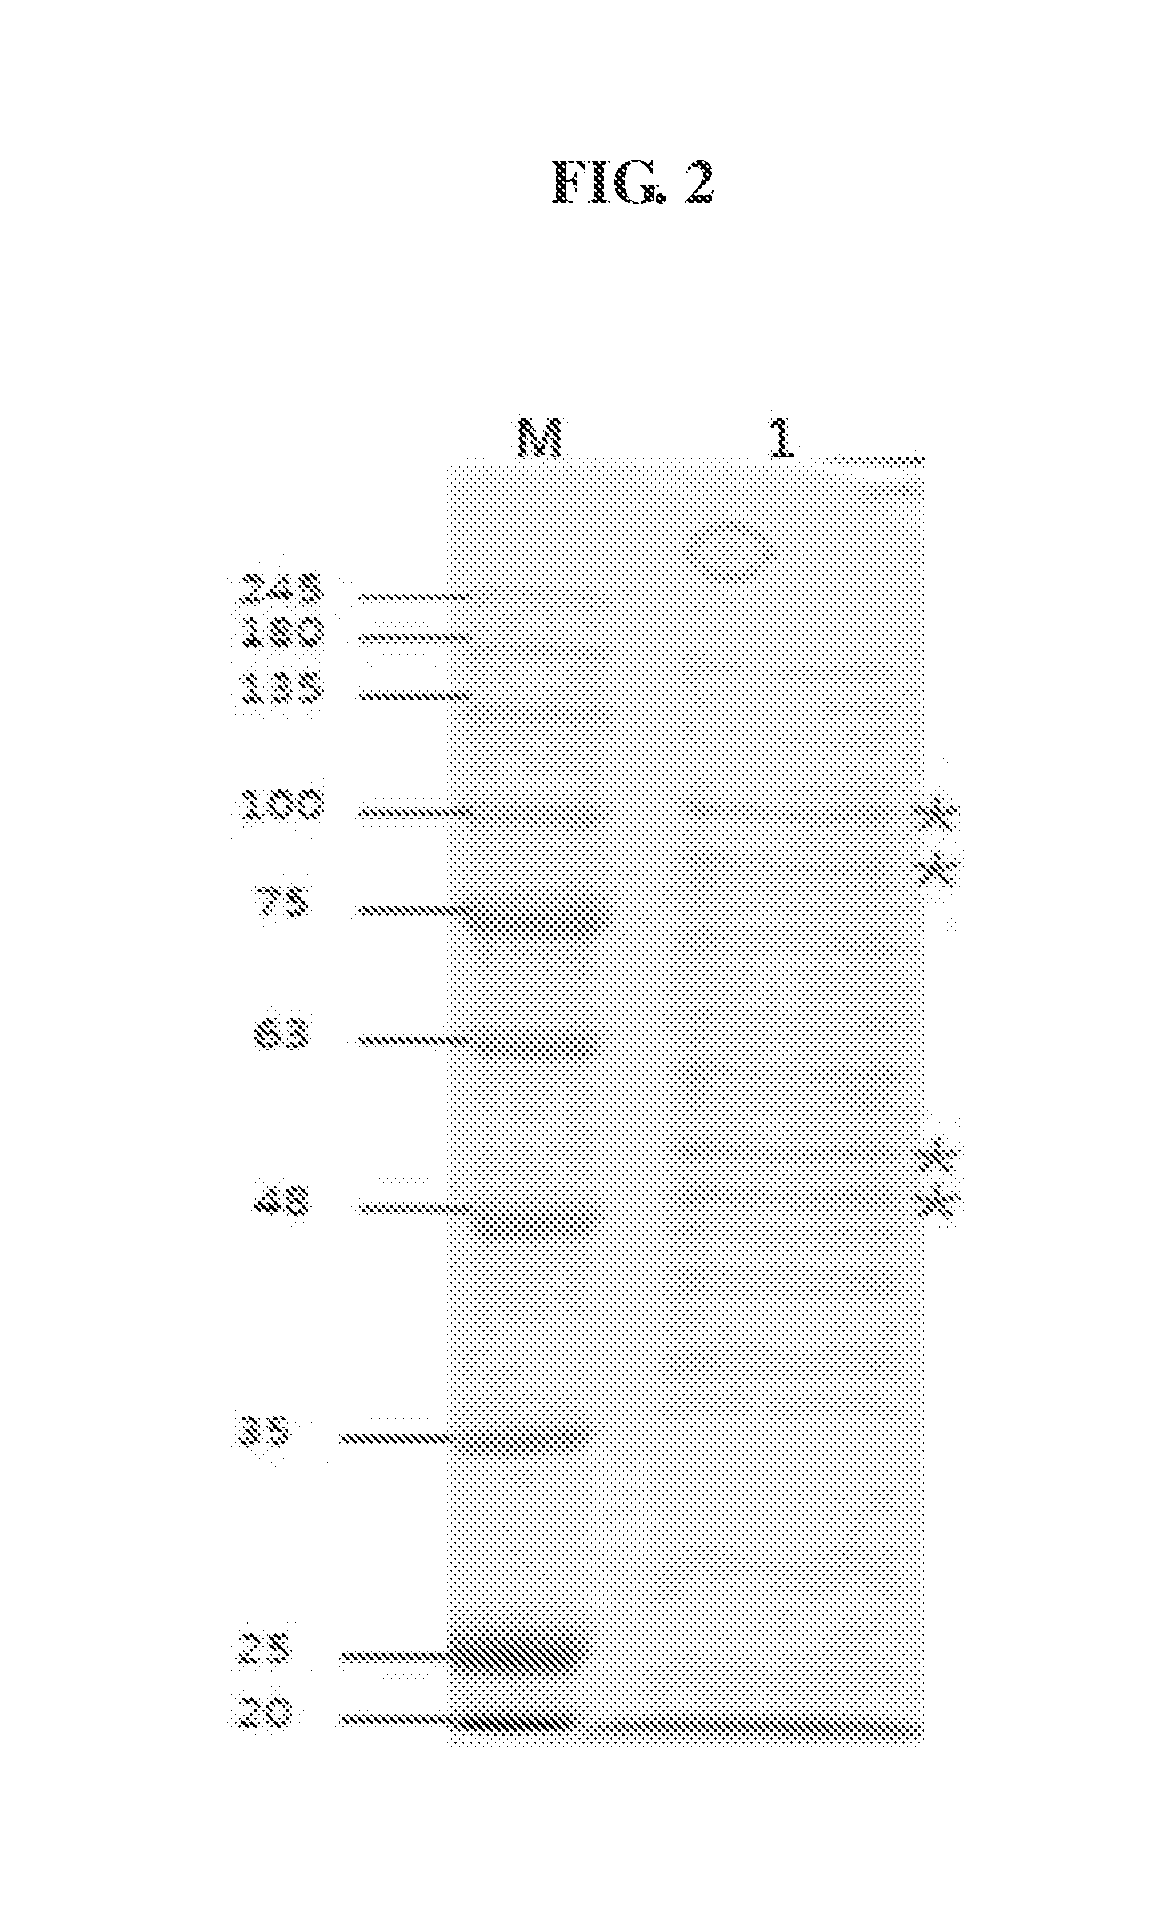 Method for prevention and treatment of escherichia coli infections using a bacteriophage with broad antibacterial spectrum against escherichia coli